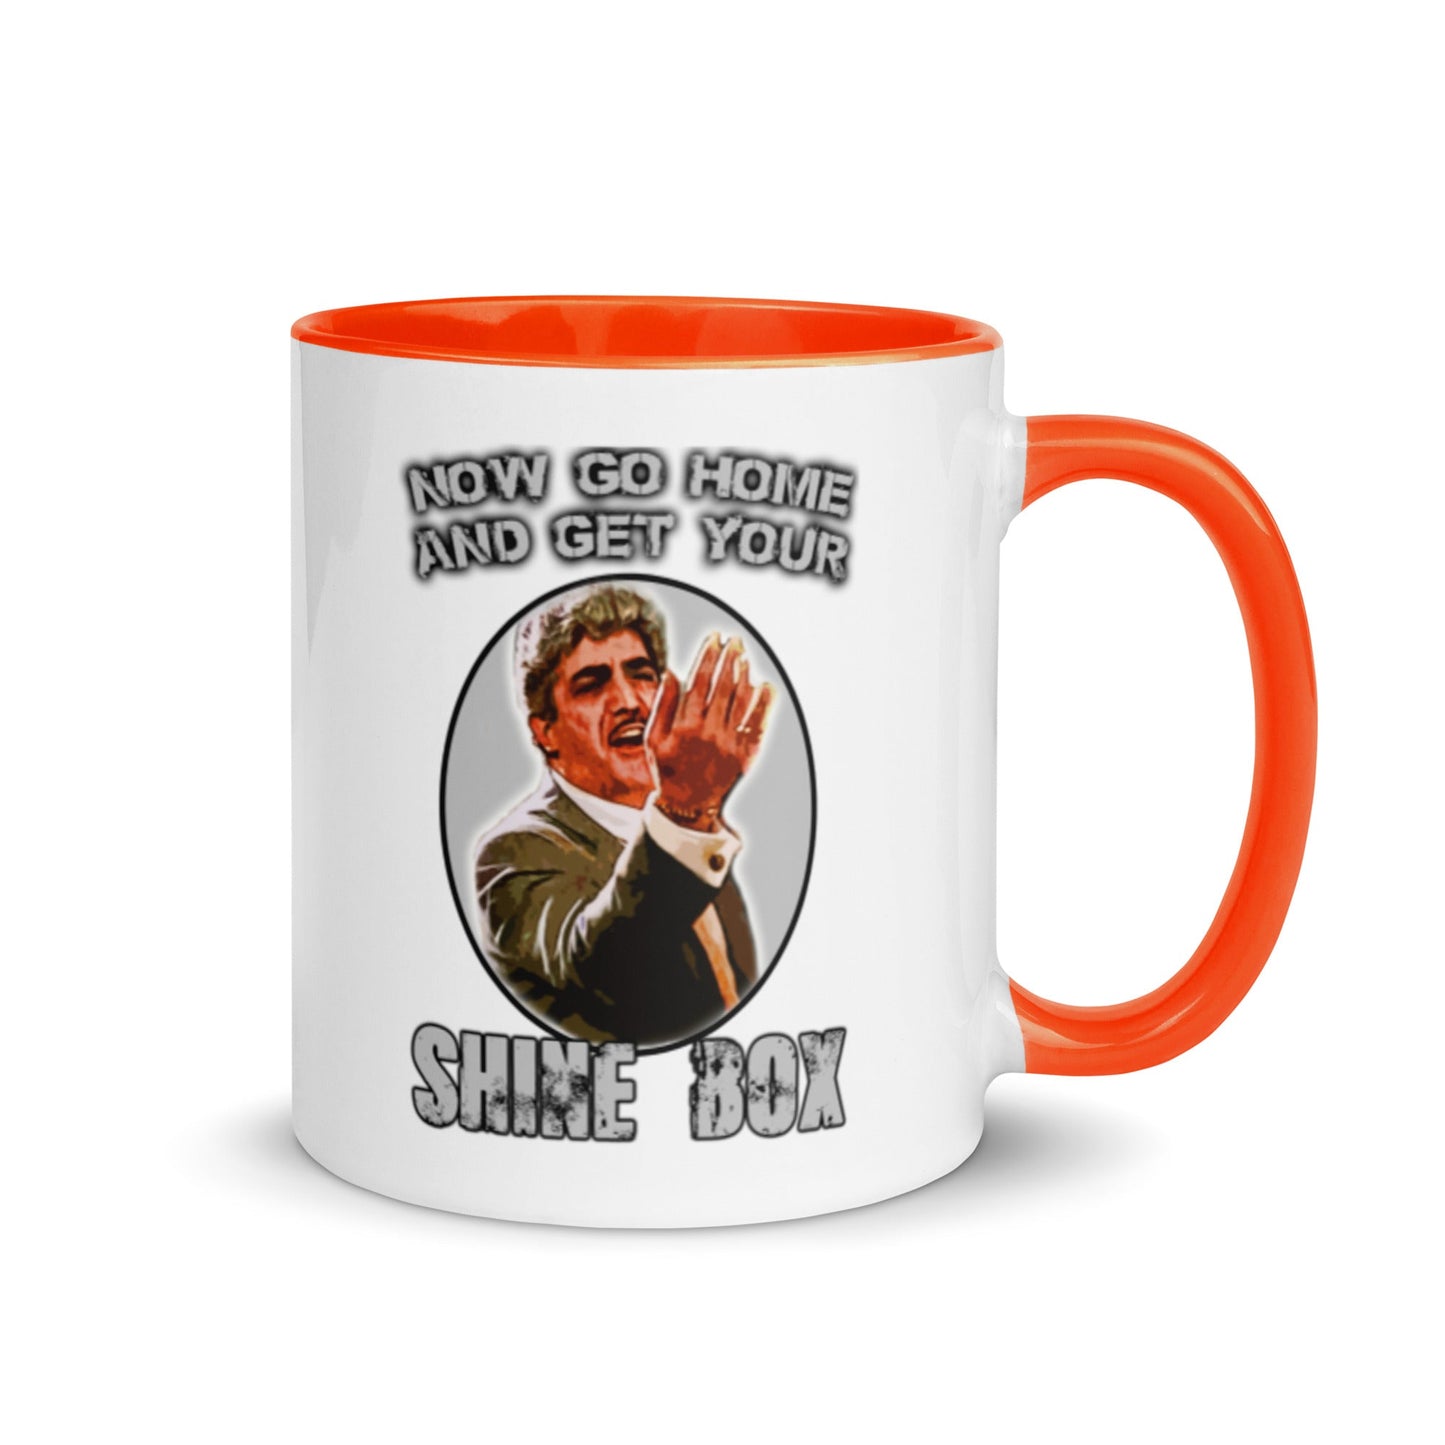 Goodfellas Movie Quote Coffee Cup - "Get Your Shine Box, Billy" - thenightmareinc